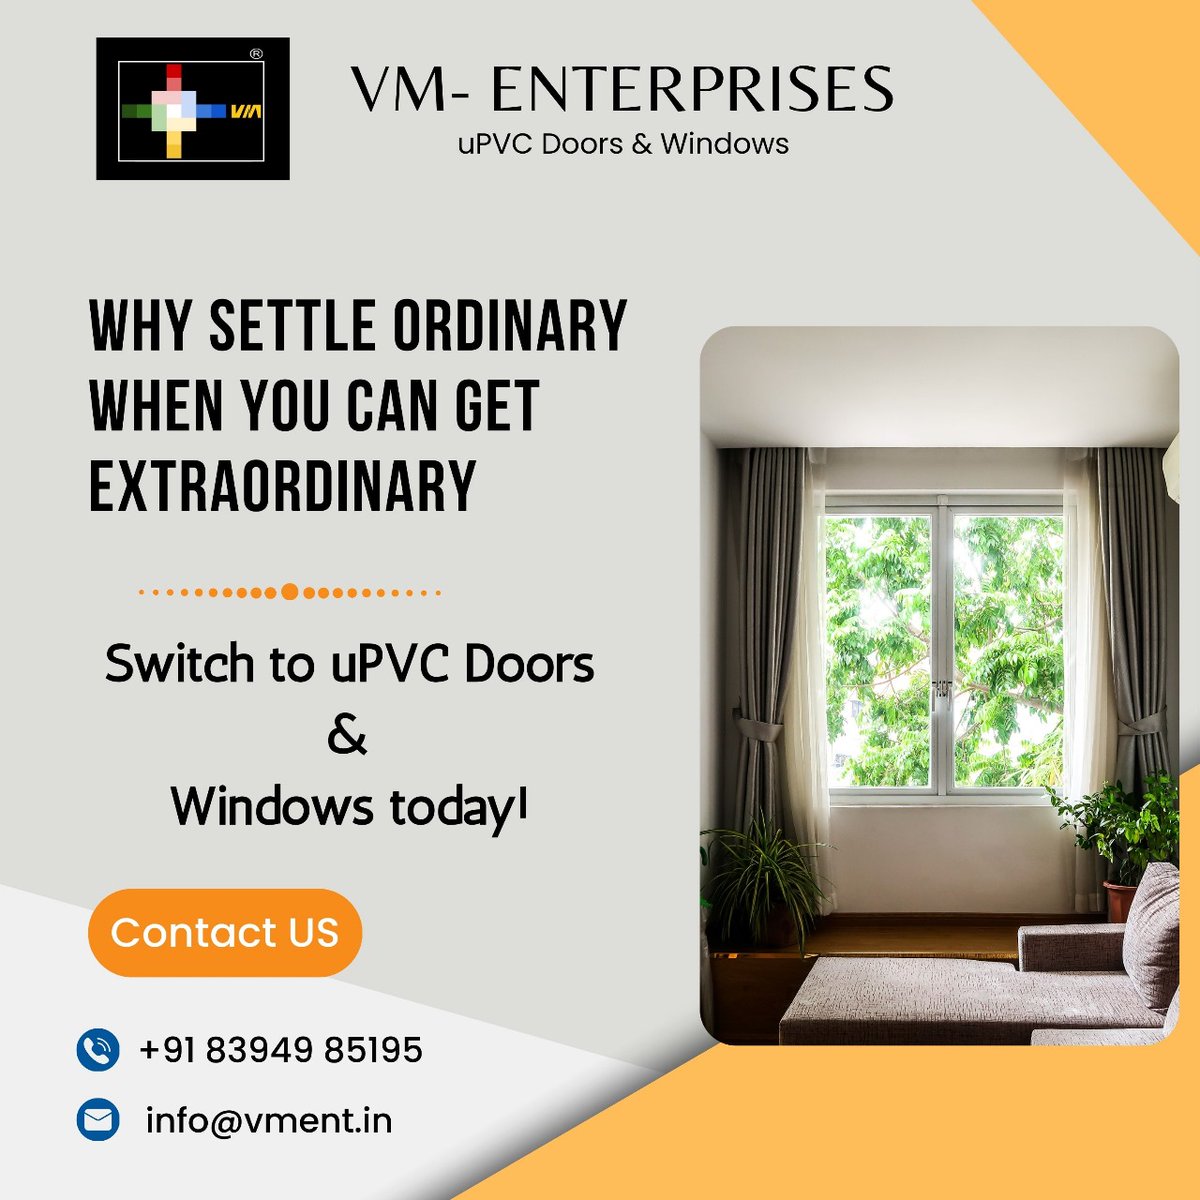 Upgrade your view from ordinary to extraordinary with VM Enterprises' uPVC doors and windows - because exceptional is always worth it.

📕 Contact Details:
📞+91 83949 85195
📧: info@vment.in

#upvc #upvcwindows #upvcdoorsandwindows #wholesalevendors #slidingdoors #vmenterprises